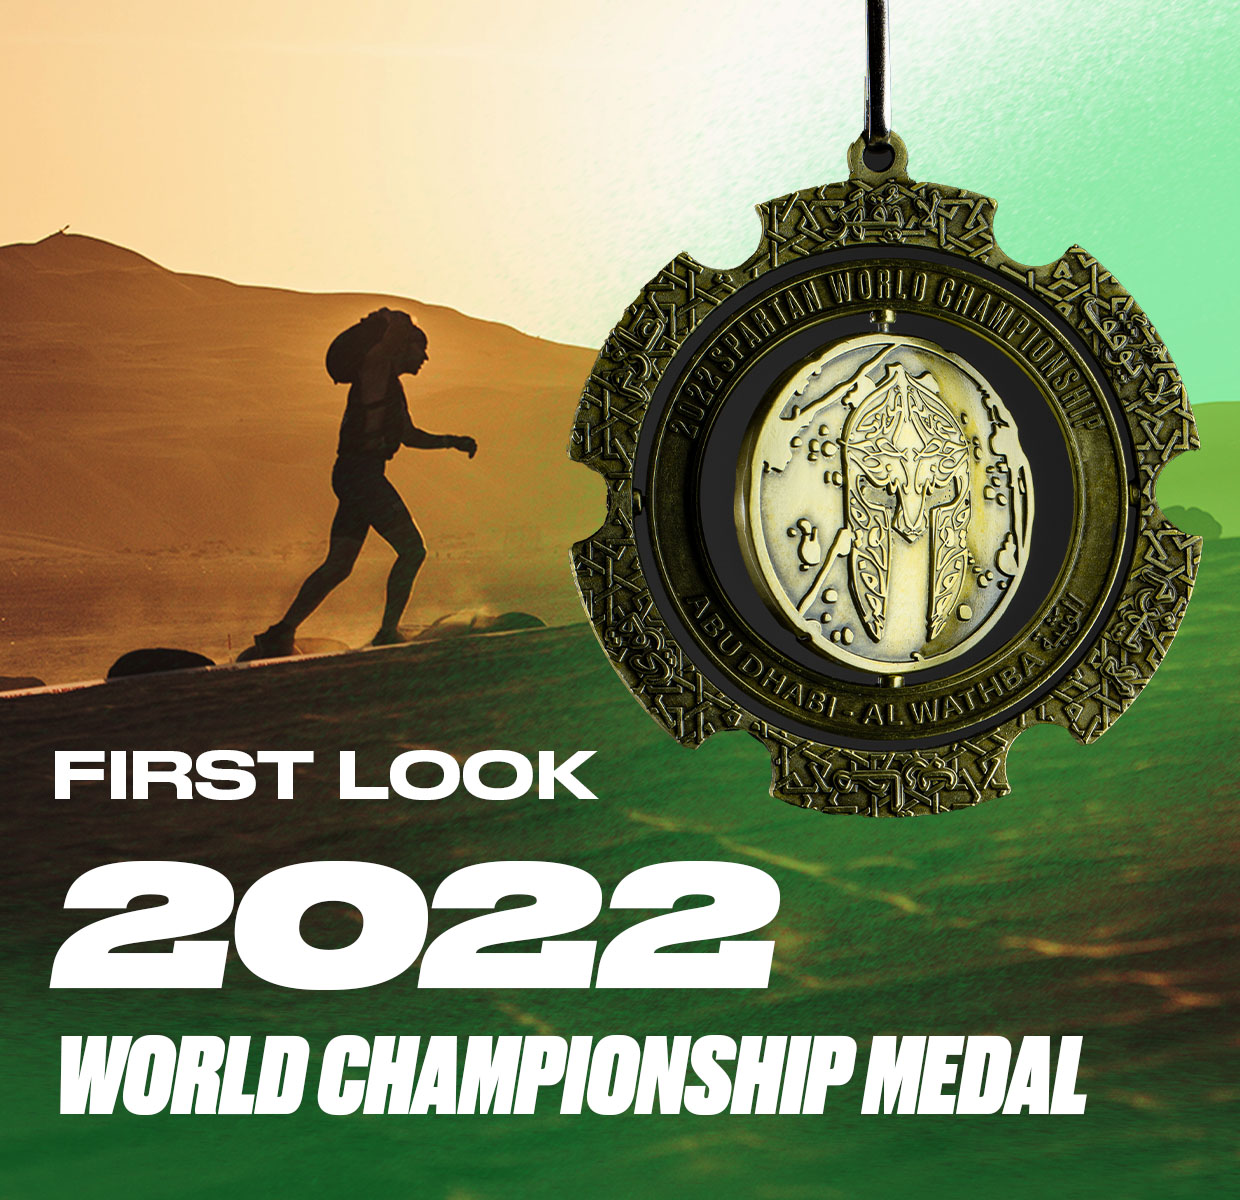 FIRST LOOK AT THE 2022 WORLD CHAMPIONSHIP MEDAL